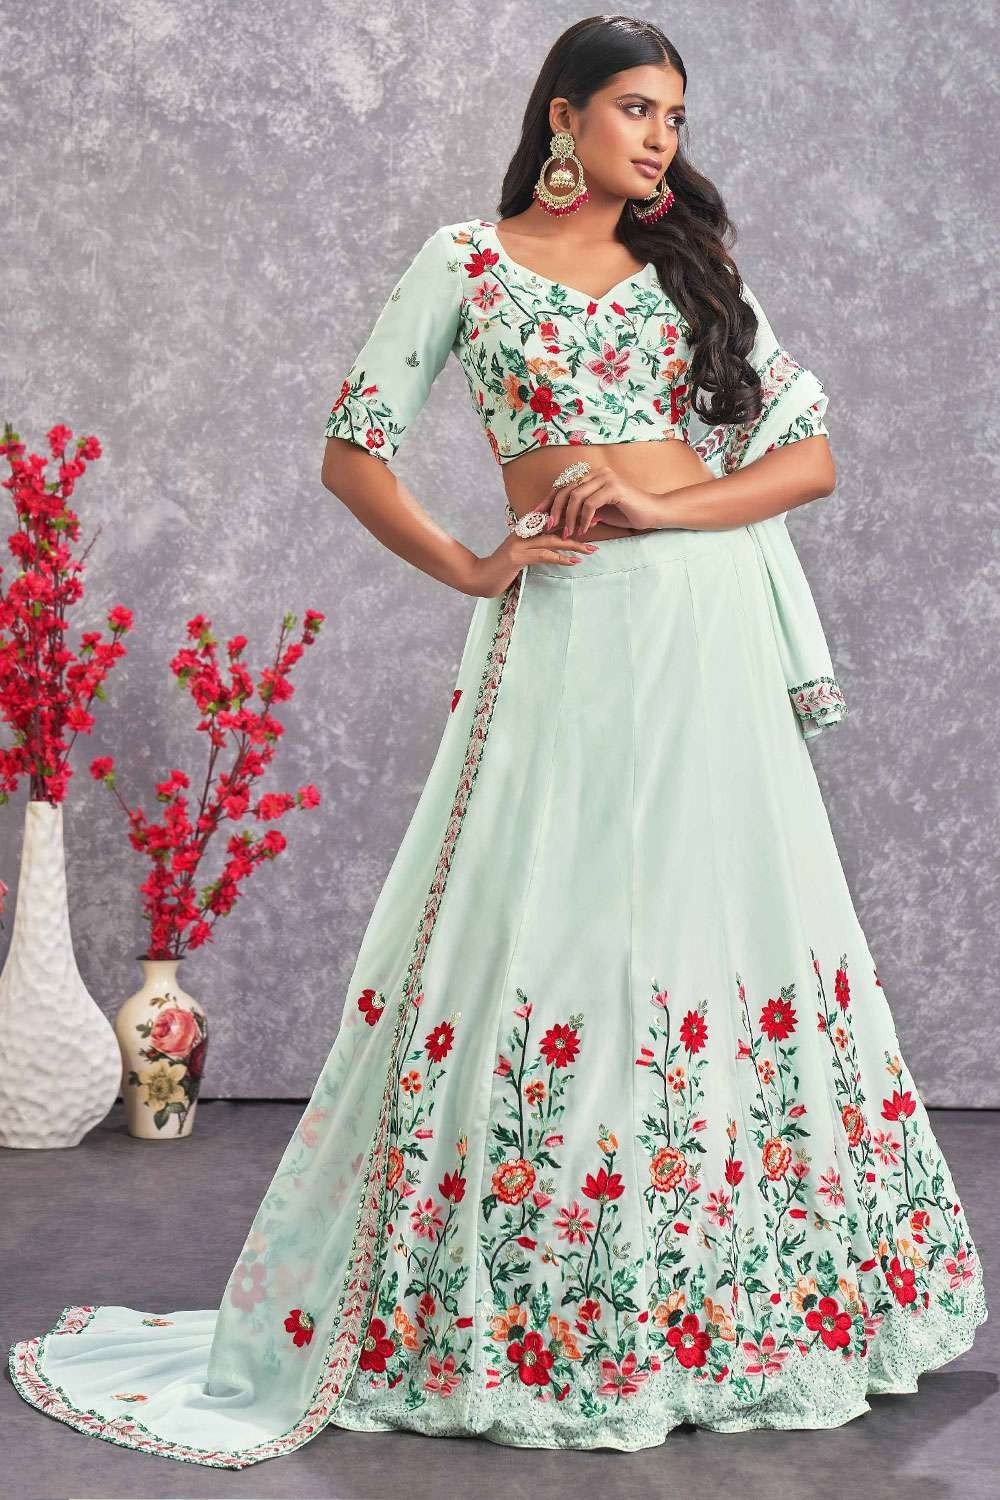 Pearl White Georgette Pleated Lehenga with Floral Embroidery and...